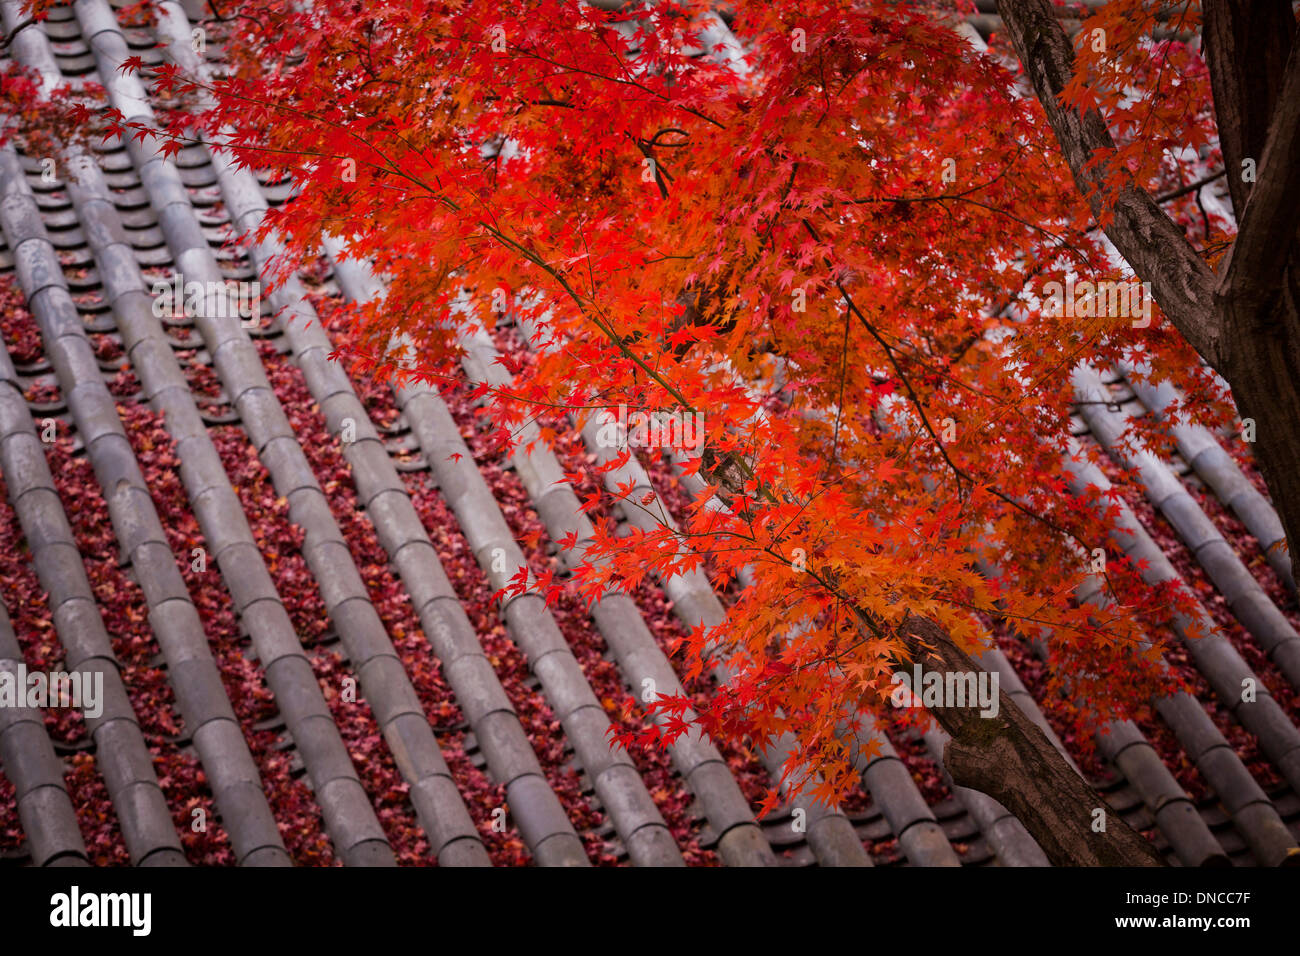 Fall color maple leaves in front of traditional Korean architecture (Hanok) - South Korea Stock Photo